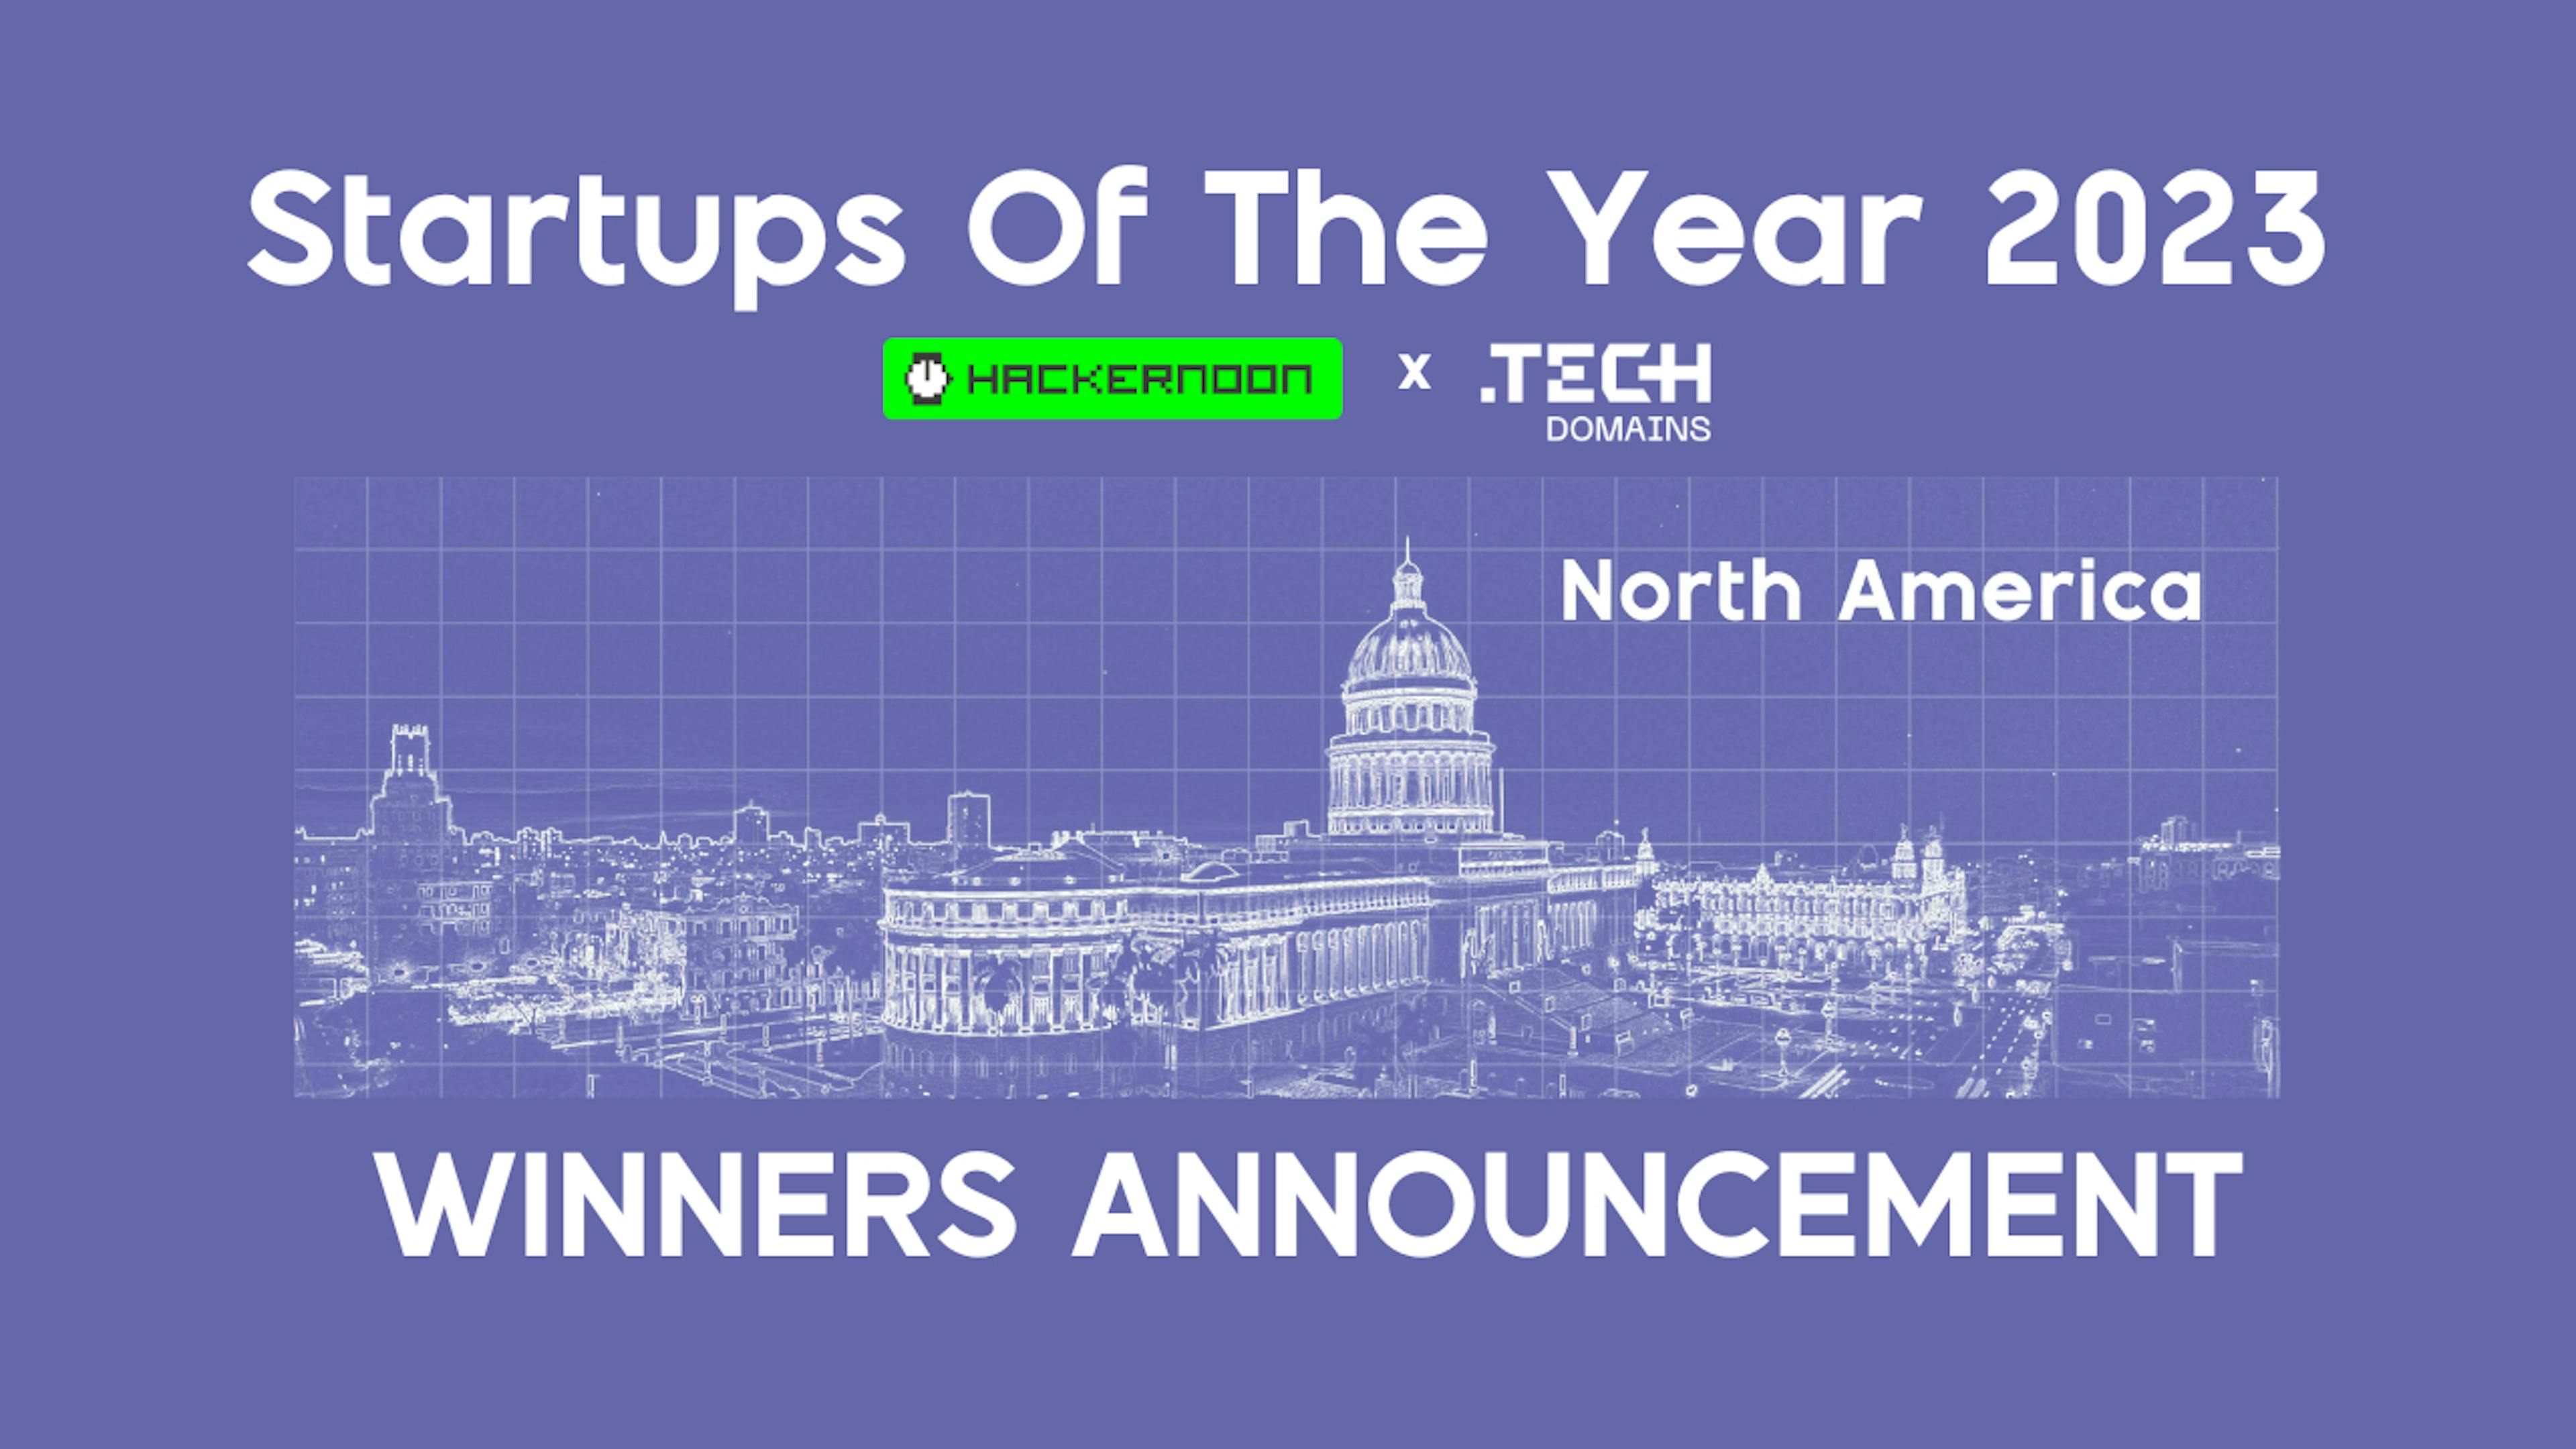 featured image - Startups of The Year 2023 Winners: North America 